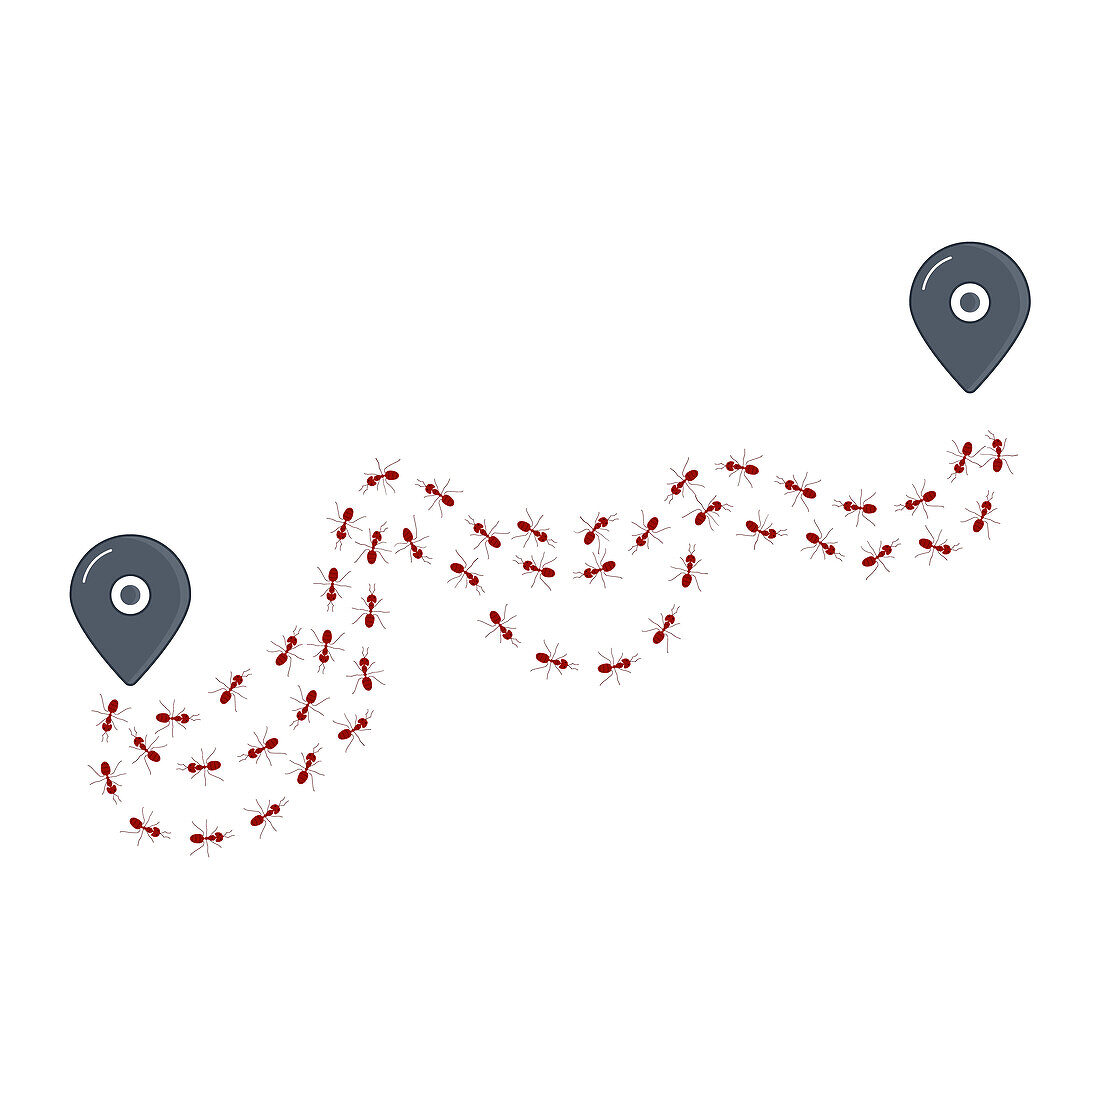 Tracking movement of ants, conceptual illustration